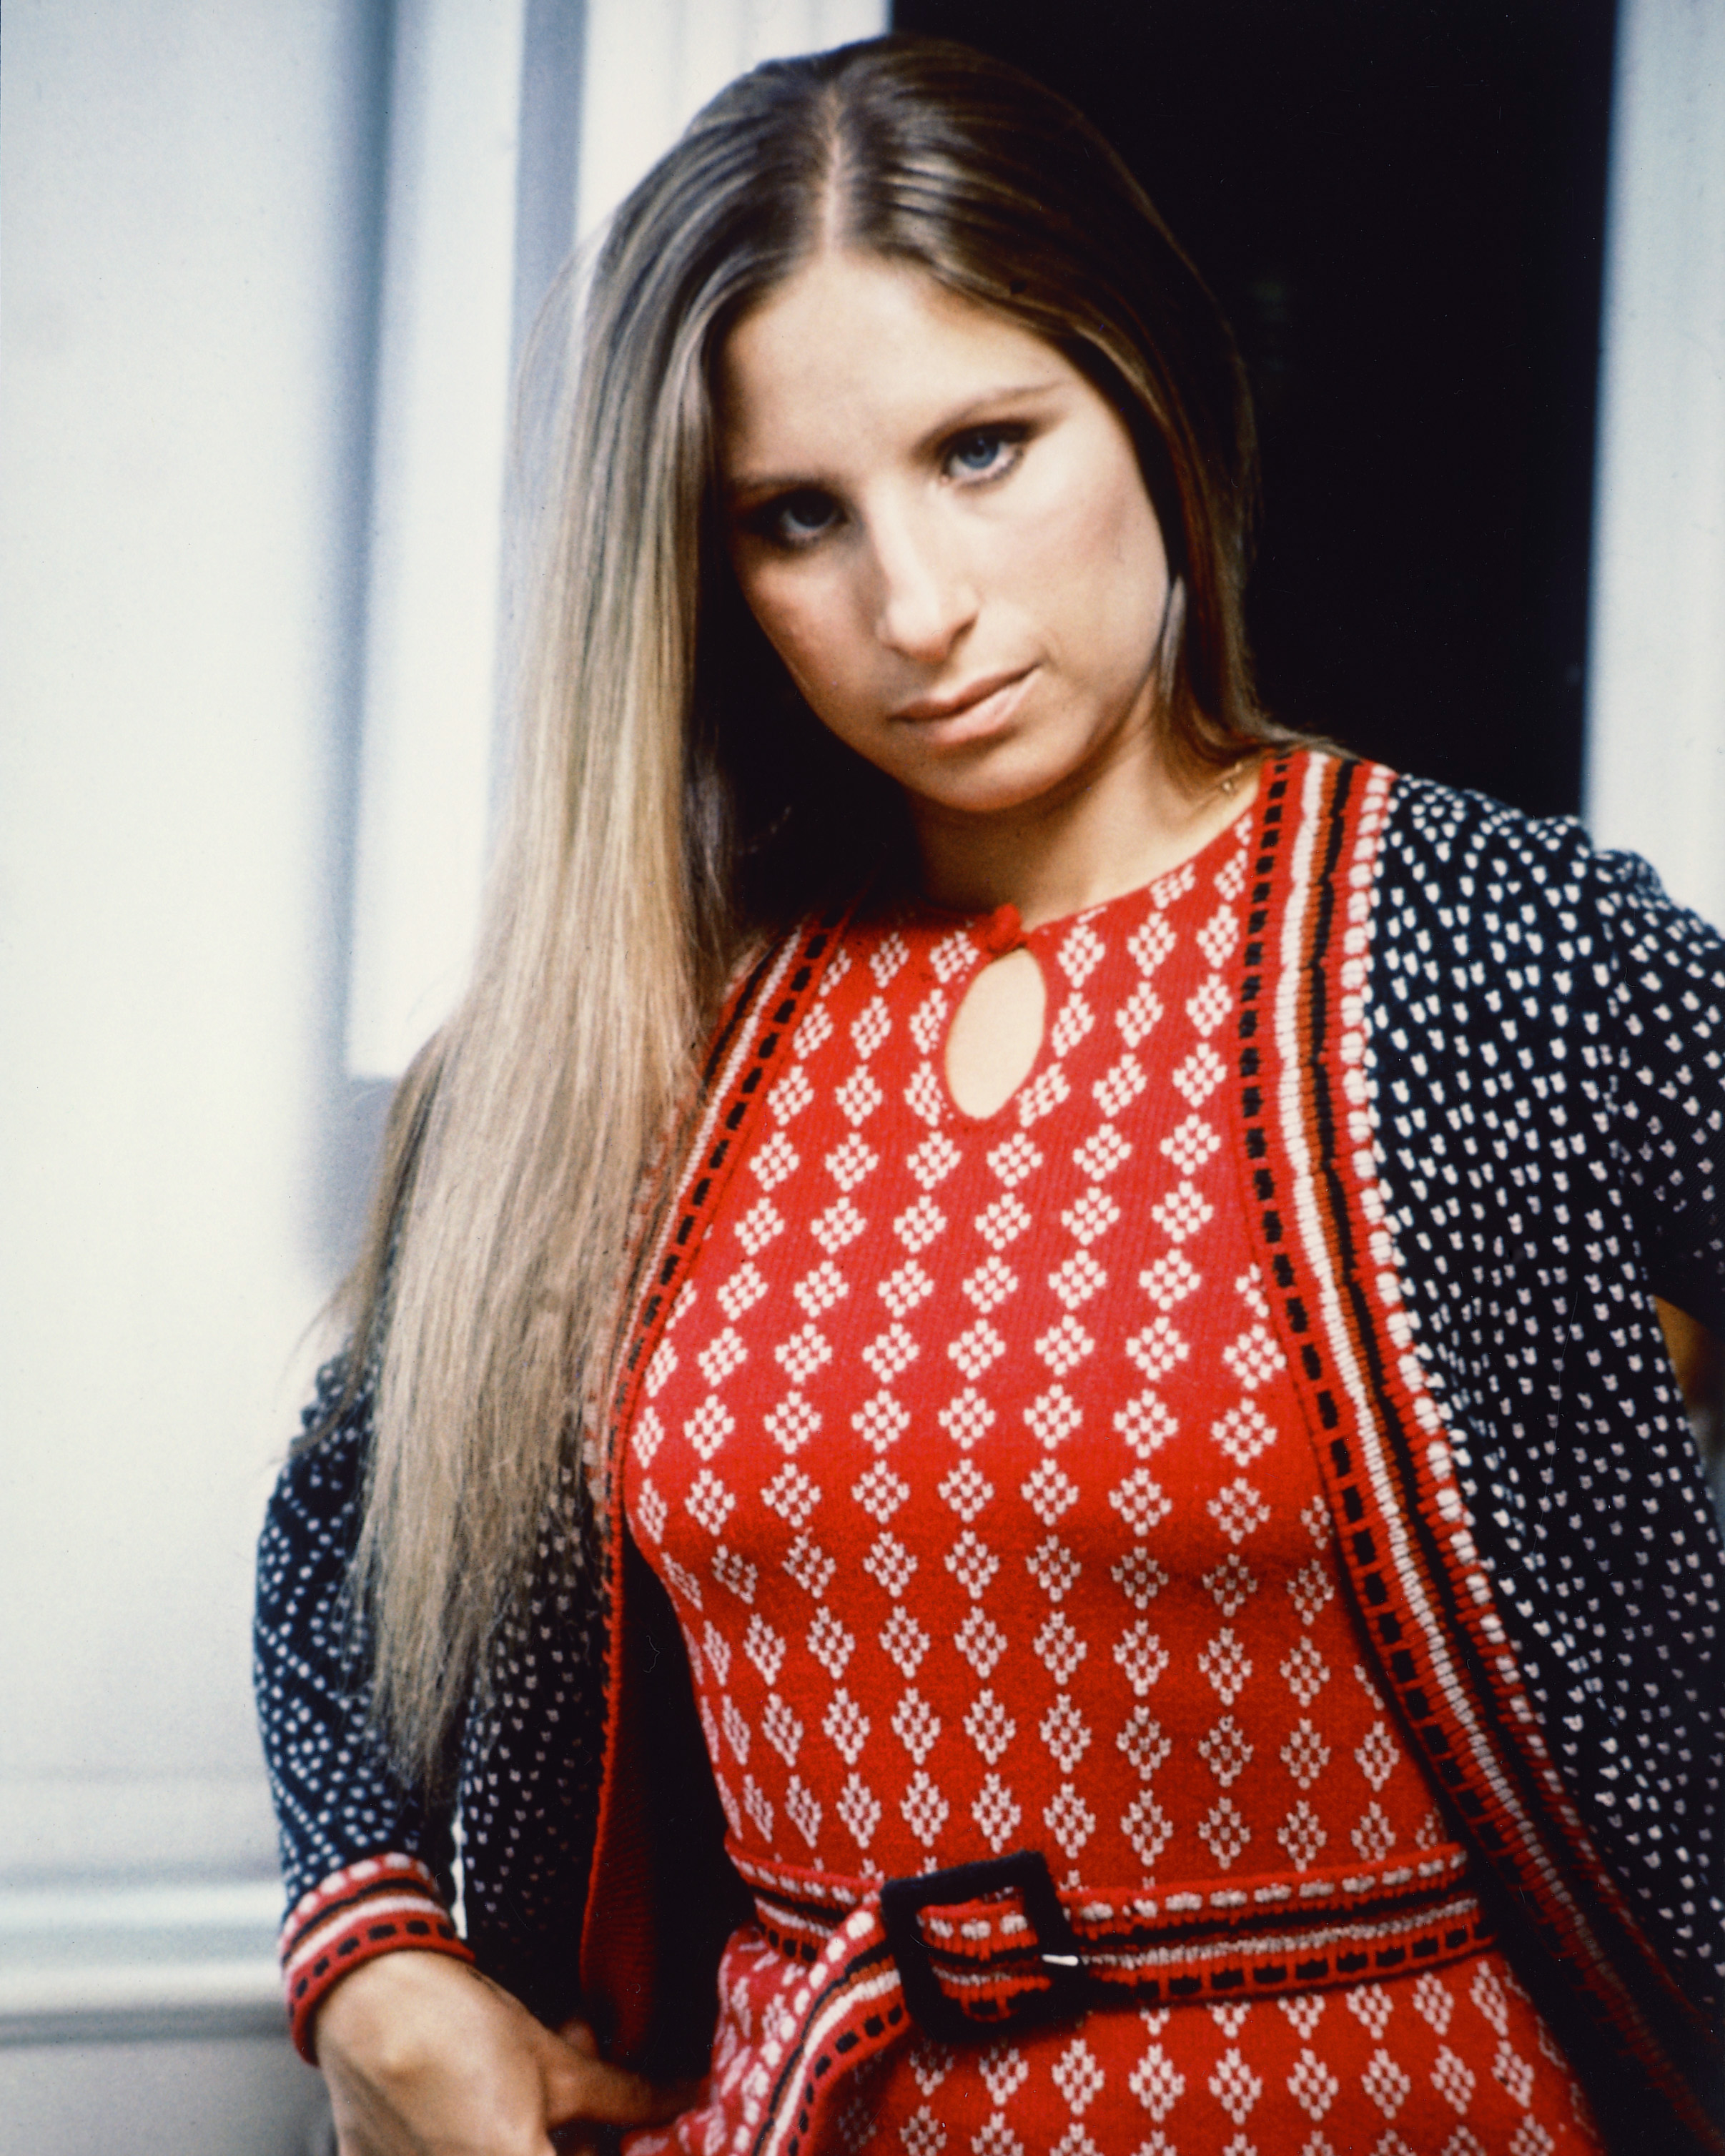 Us actress and singer, Barbra Streisand. Circa 1965 | Source: Getty Images